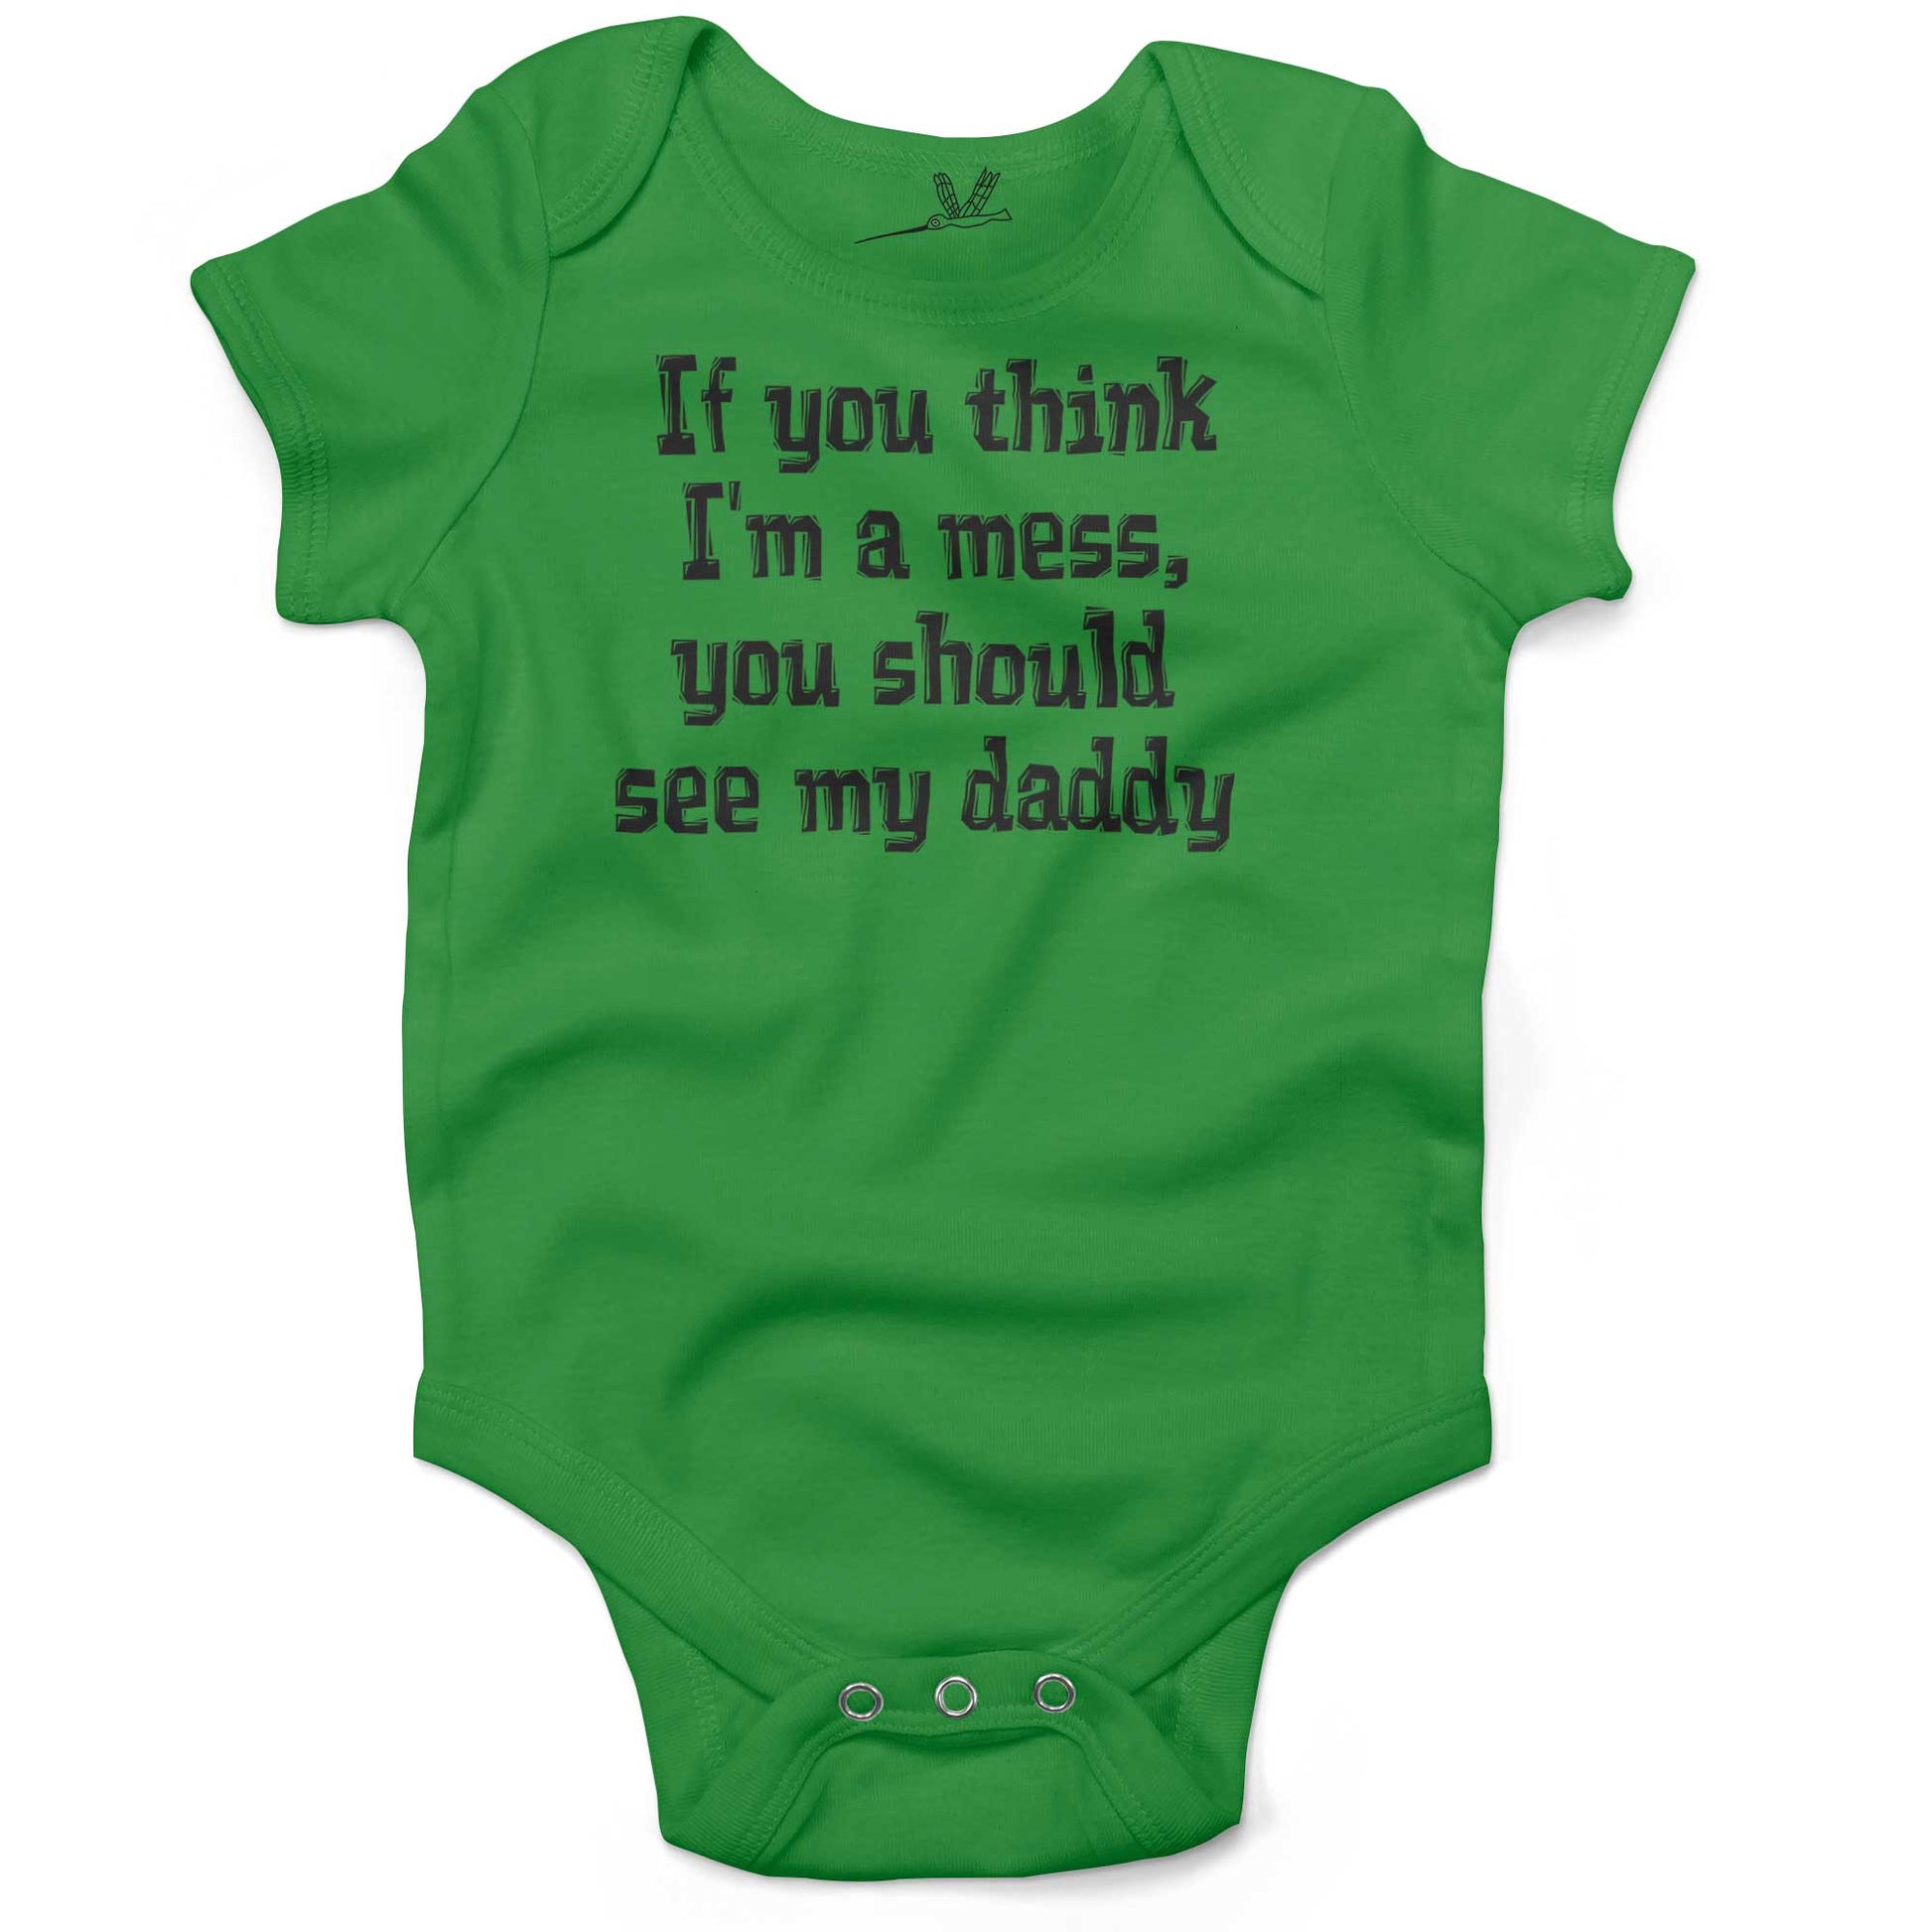 If You Think I'm A Mess, You Should See My Daddy Infant Bodysuit or Raglan Tee-Grass Green-3-6 months